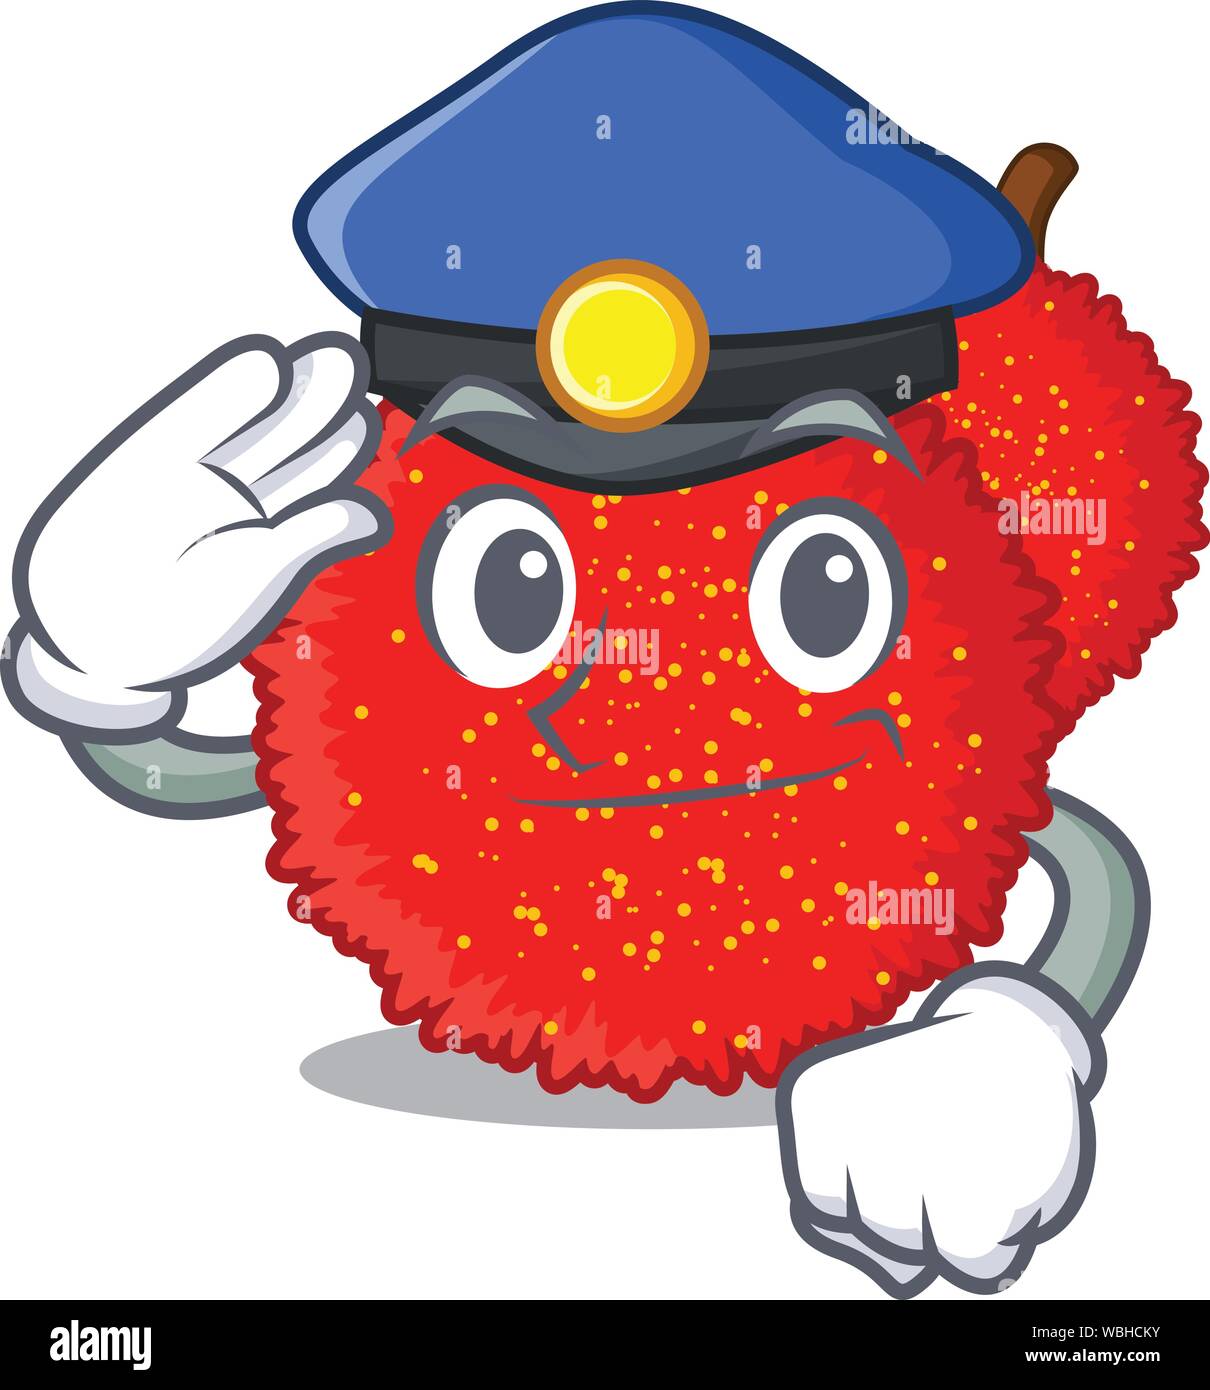 Police fresh bayberry fruit in mascot basket Stock Vector